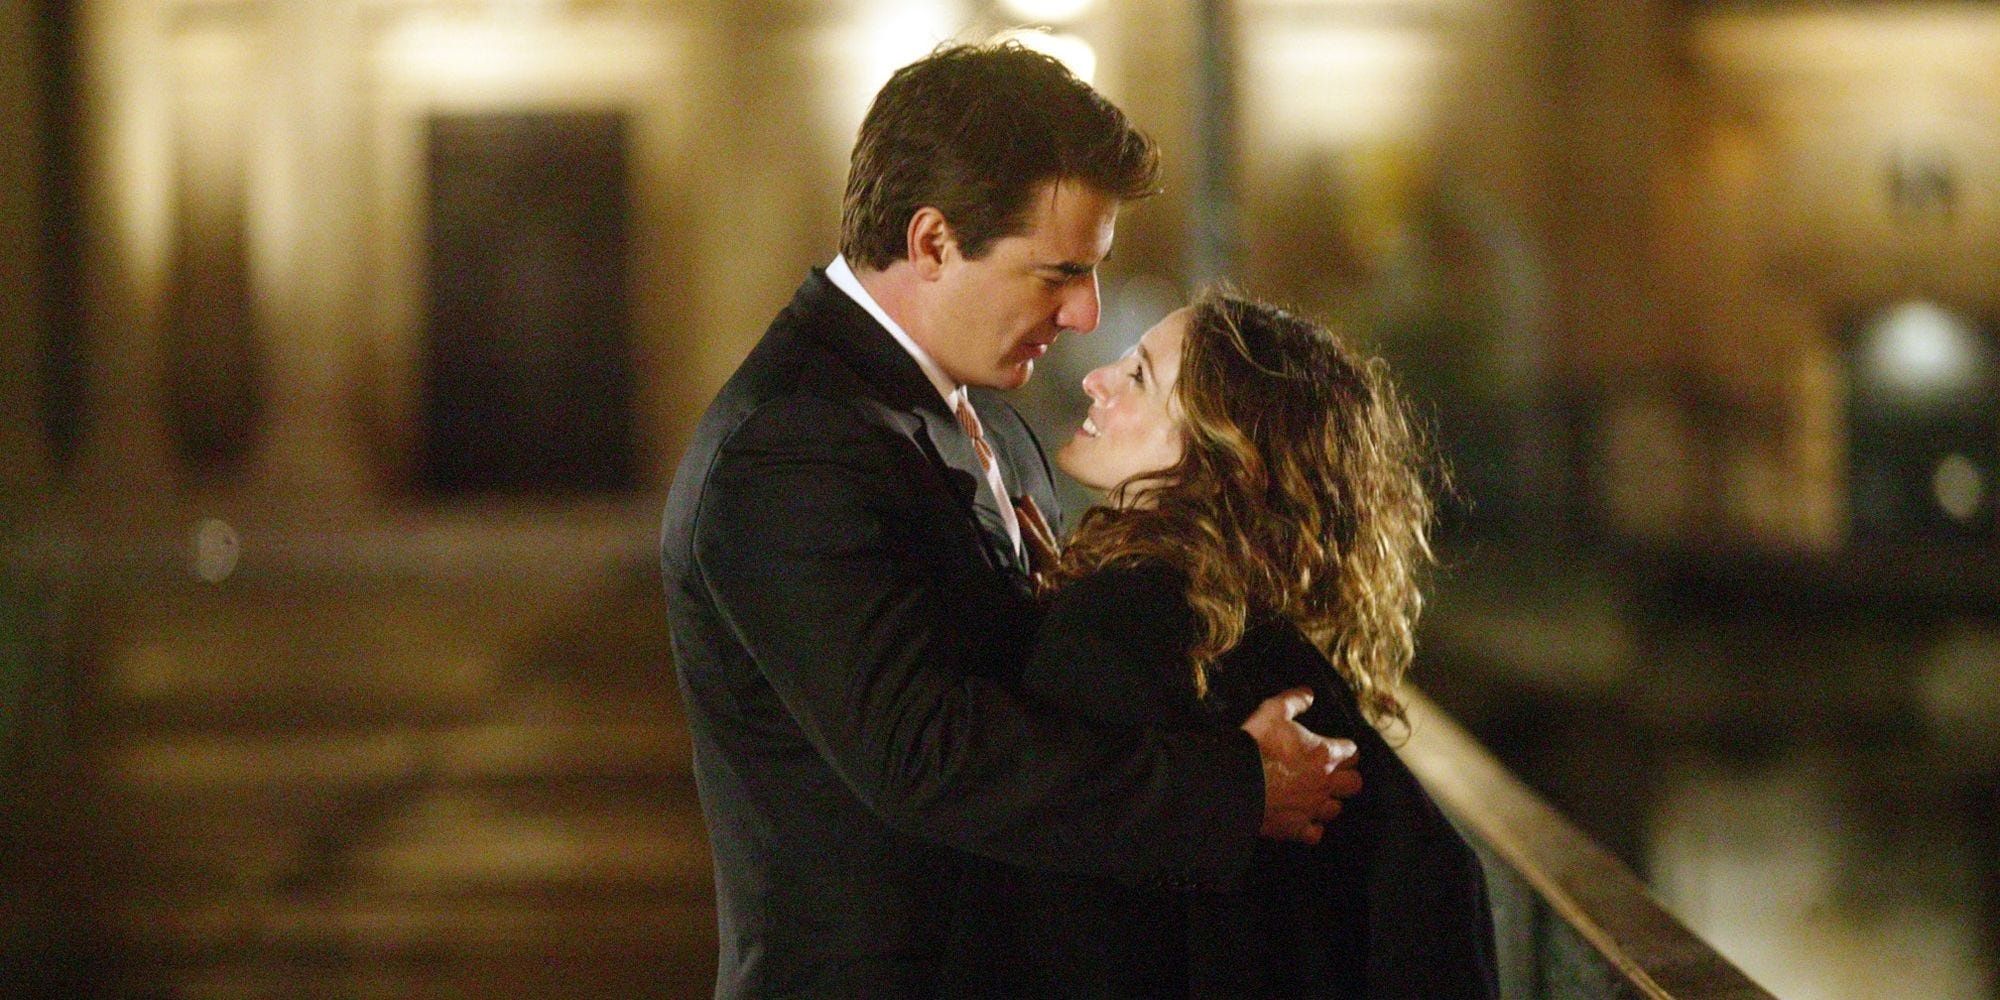 Mr. Big and Carrie embrace outside in Sex and the City.